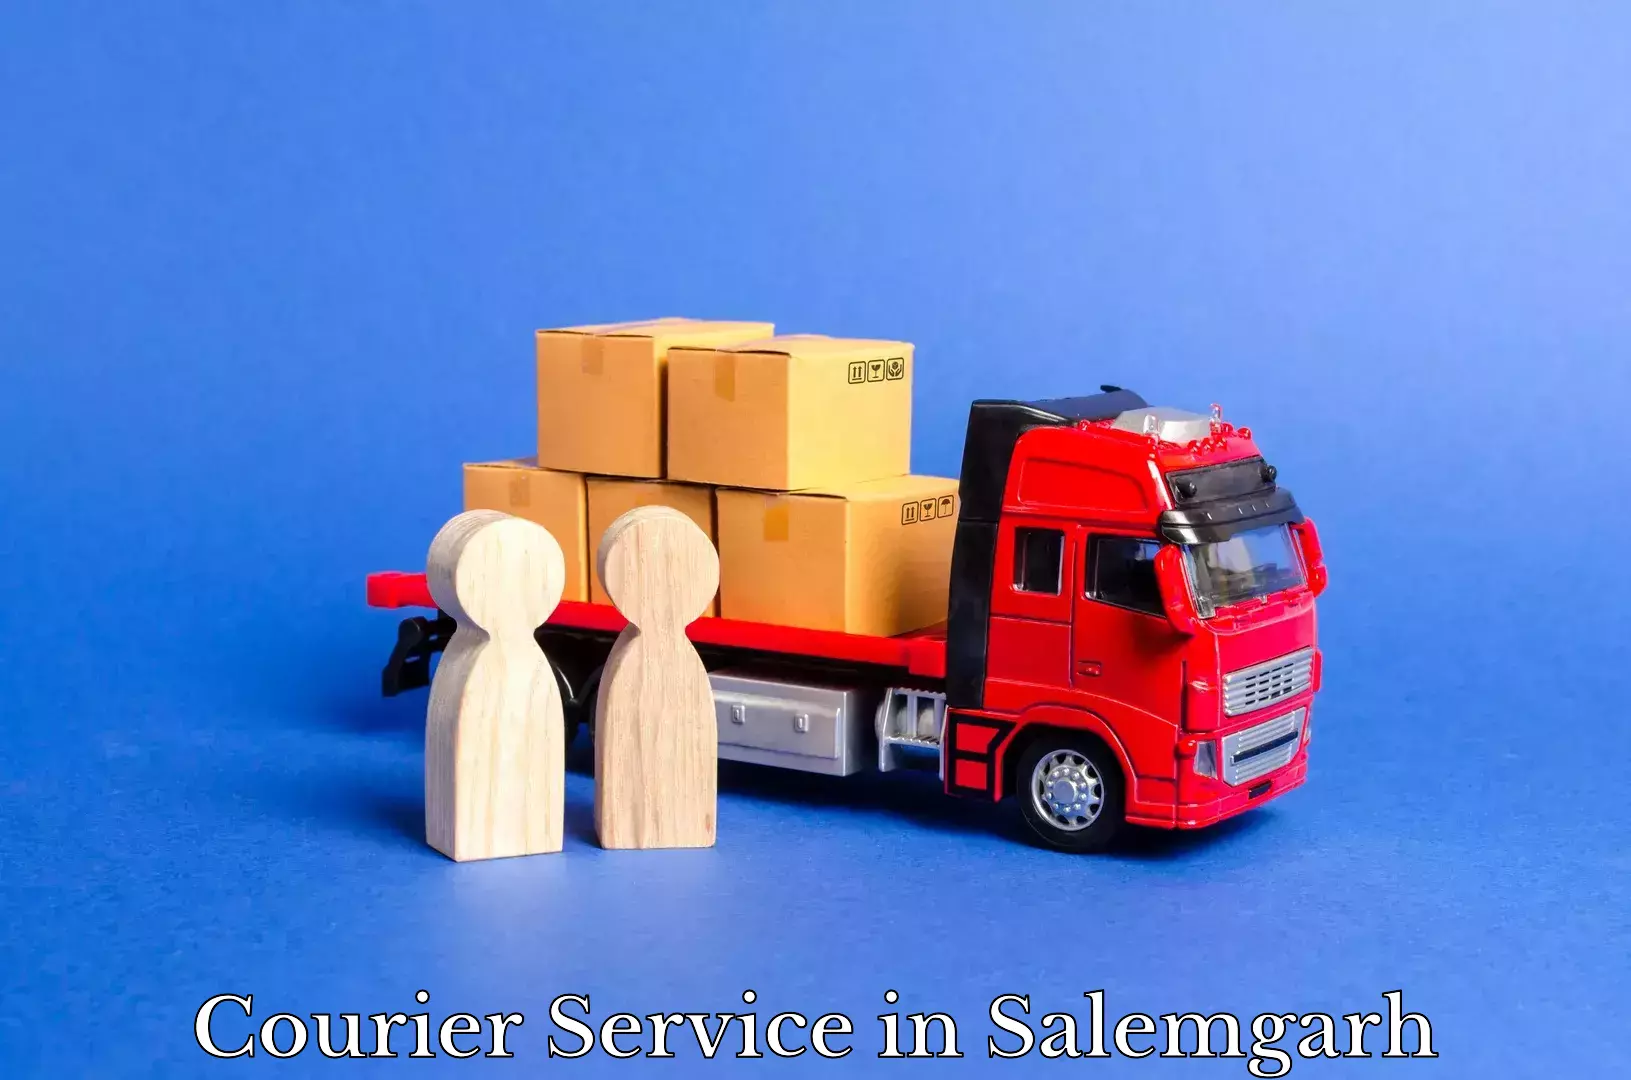 Courier service booking in Salemgarh